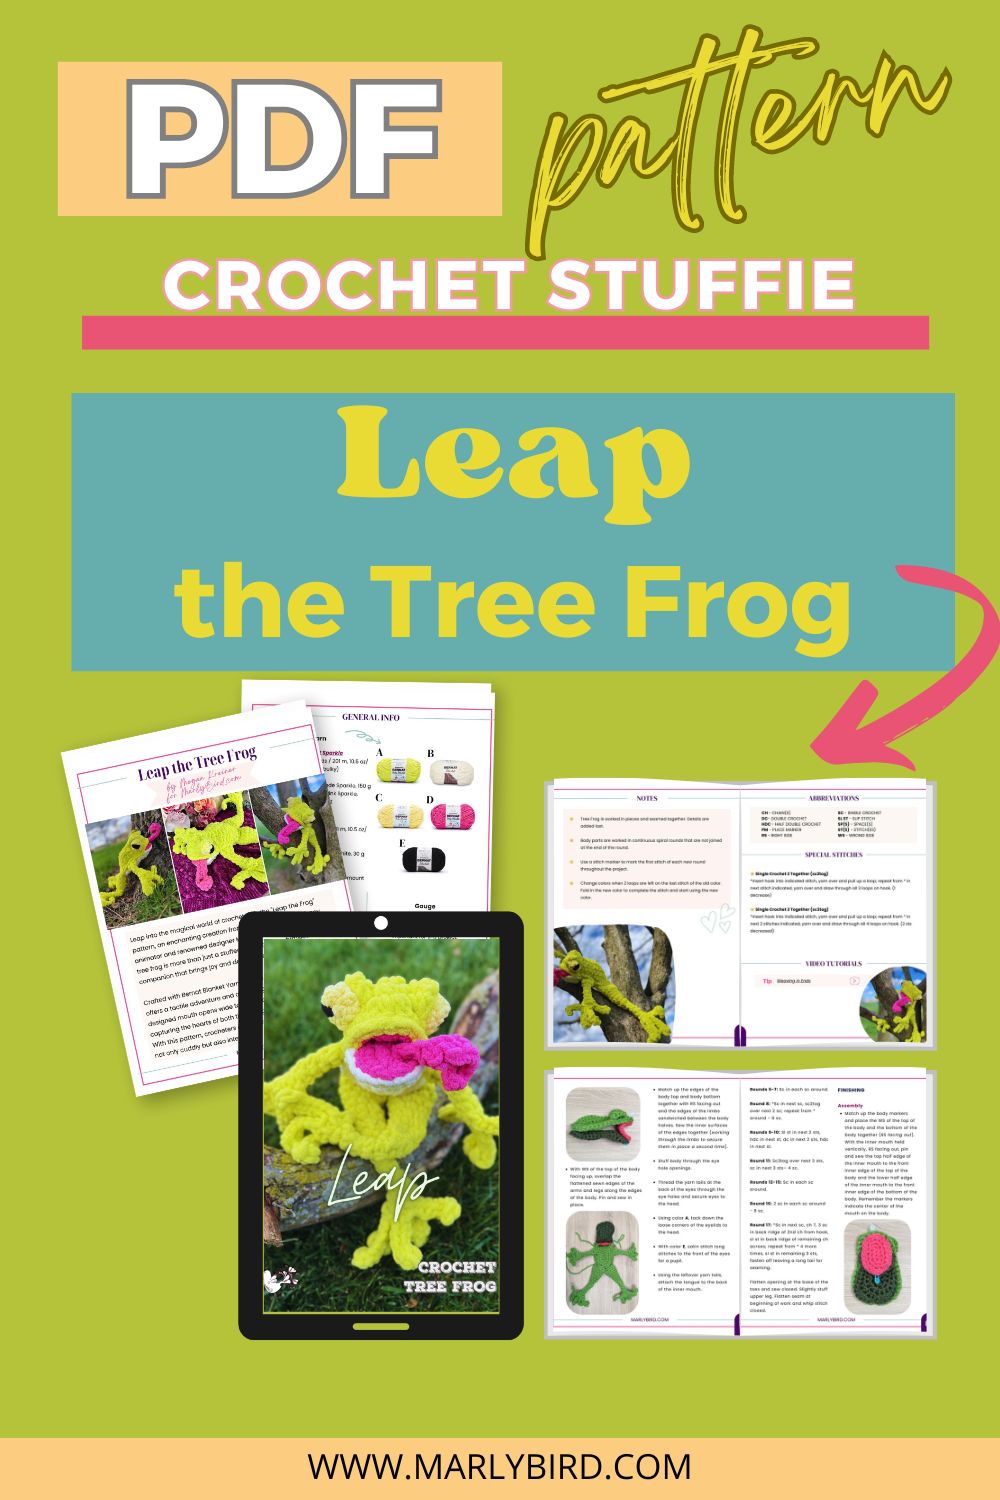 Promotional image for a PDF pattern titled "Leap the Tree Frog." It features crochet instructions for creating a leggy frog. It includes a tablet displaying a picture of the crochet frog, printed pages of the pattern, and the text "Marly Bird" at the bottom. -Marly Bird